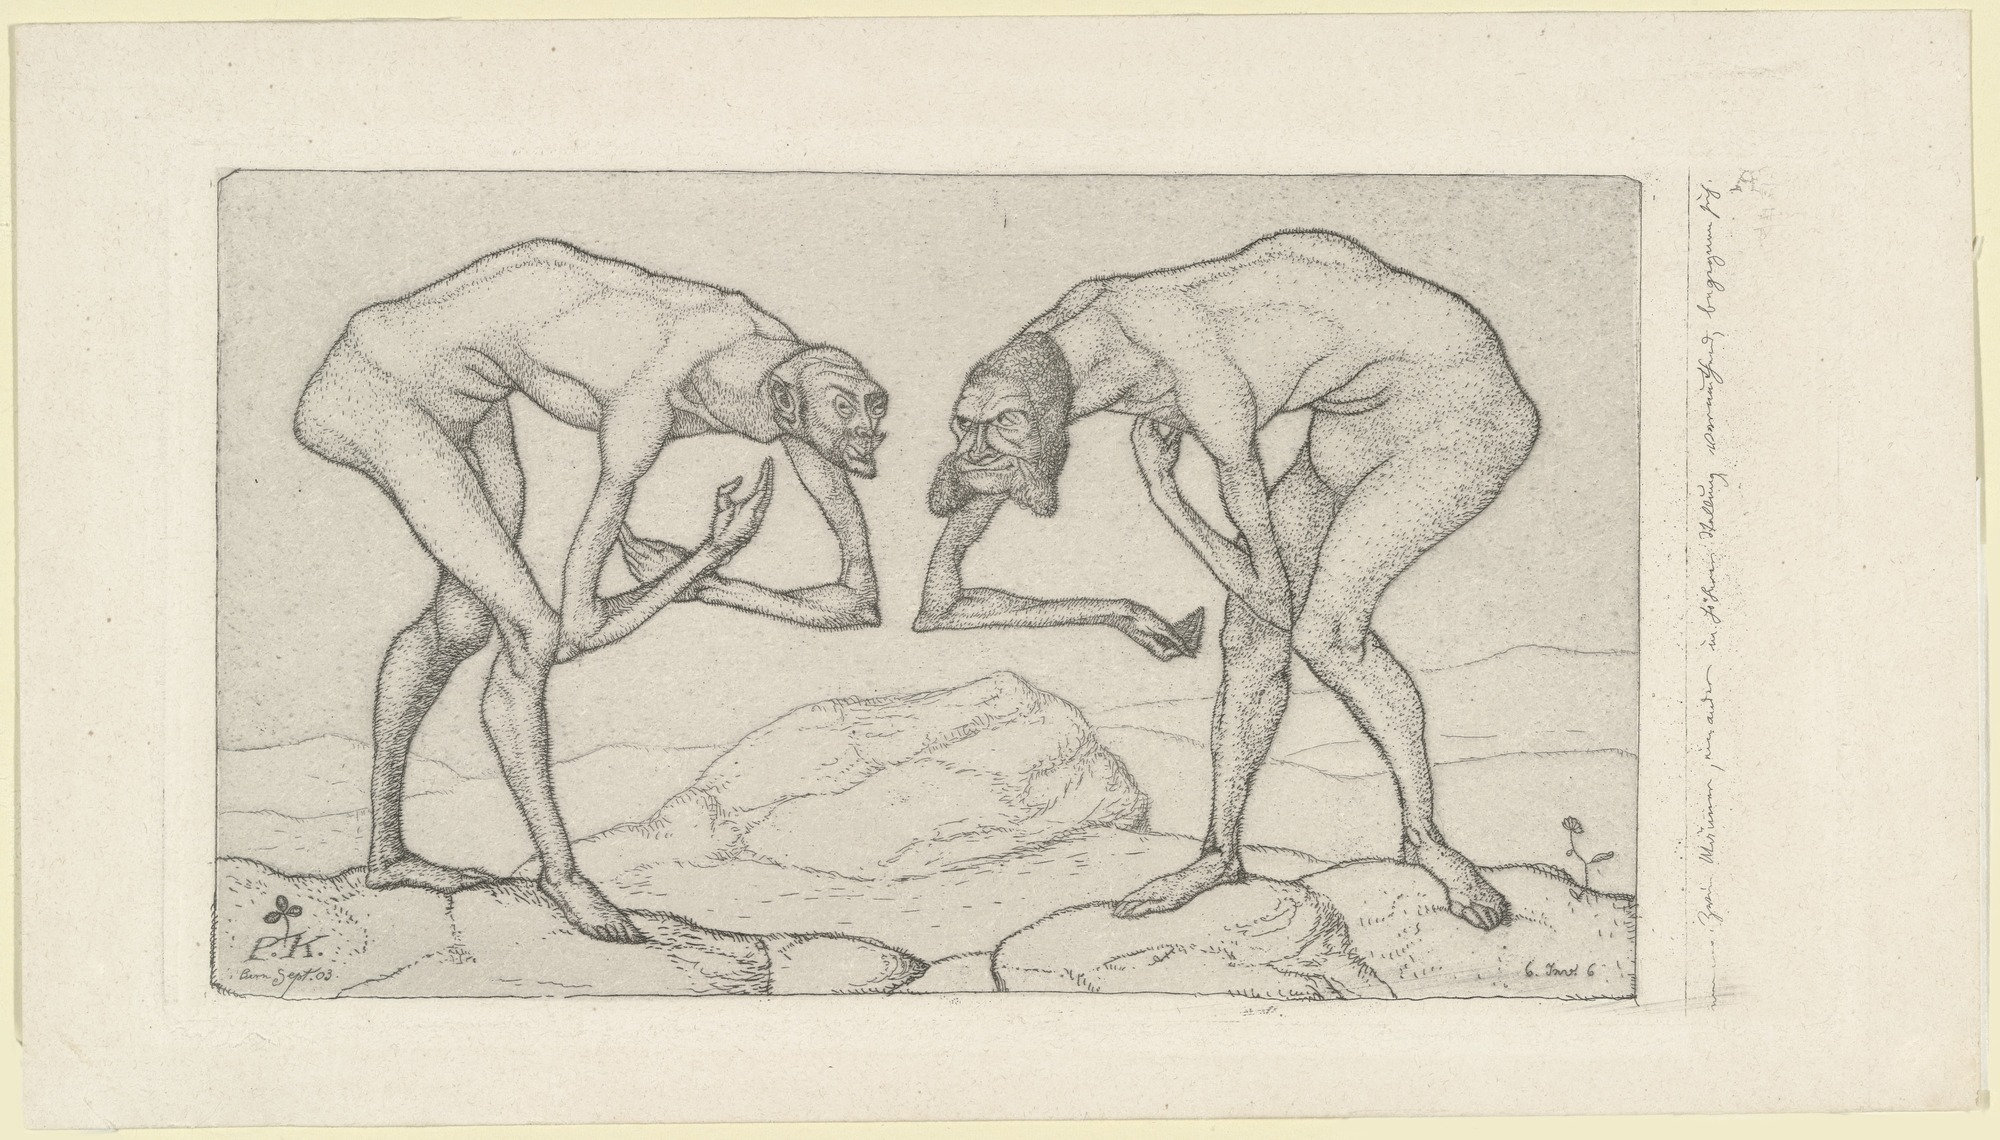 Two Men Meet, Each Believing The Other To Be Of Higher Rank by Paul Klee - 1903 - 11,7 x 22,4 cm Zentrum Paul Klee